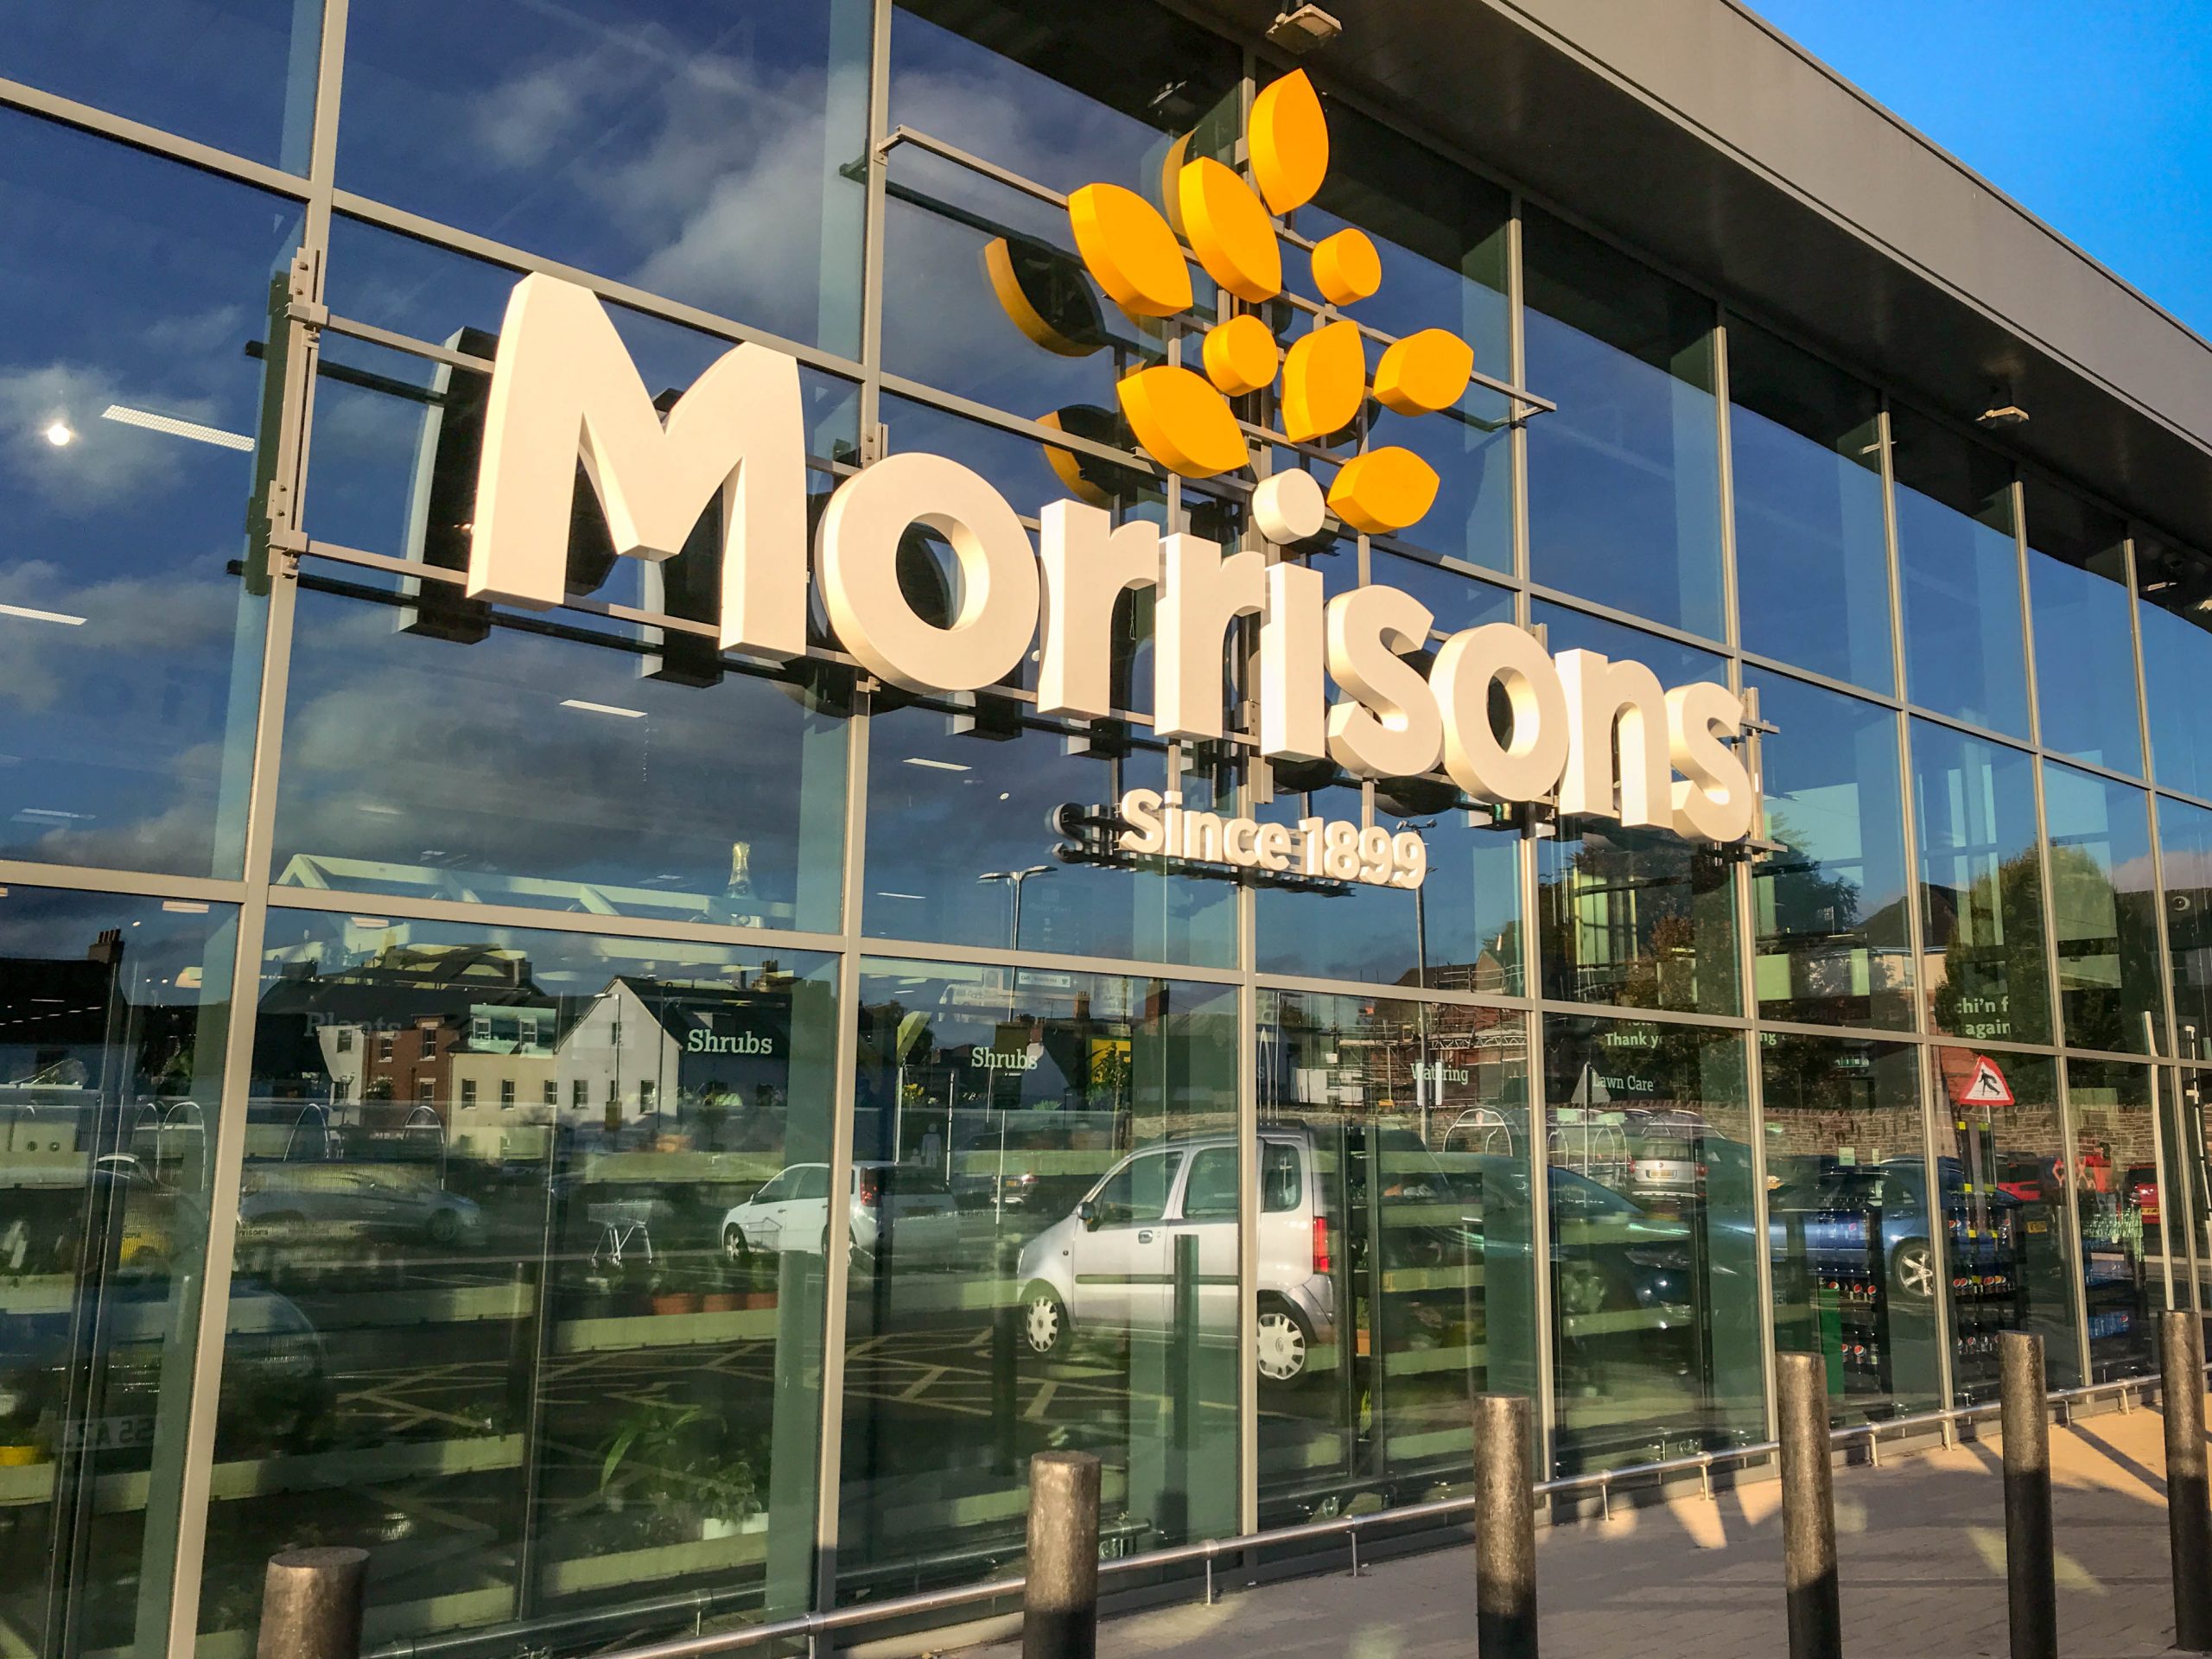 Morrisons rejects £5.5bn takeover bid – then shares spike